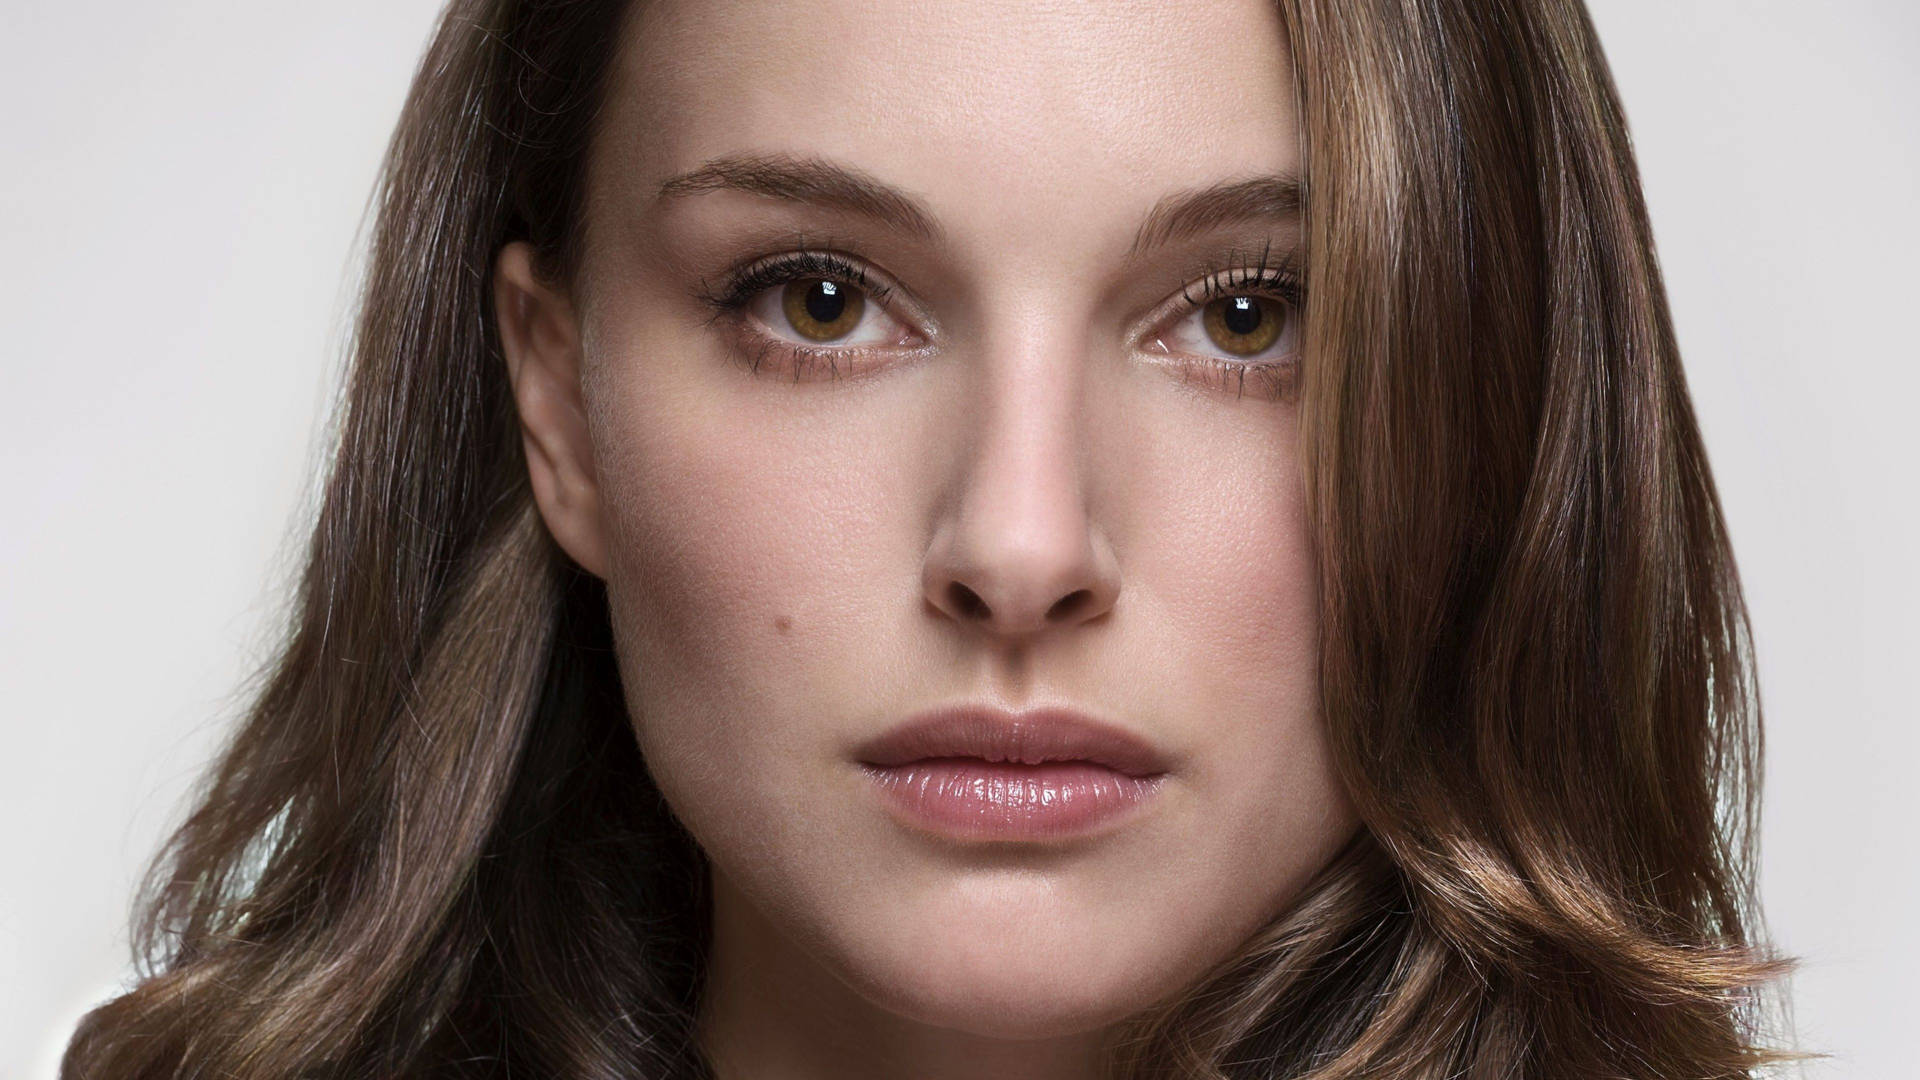 "Actress Natalie Portman Looking Flawlessly Natural Without Makeup" Wallpaper